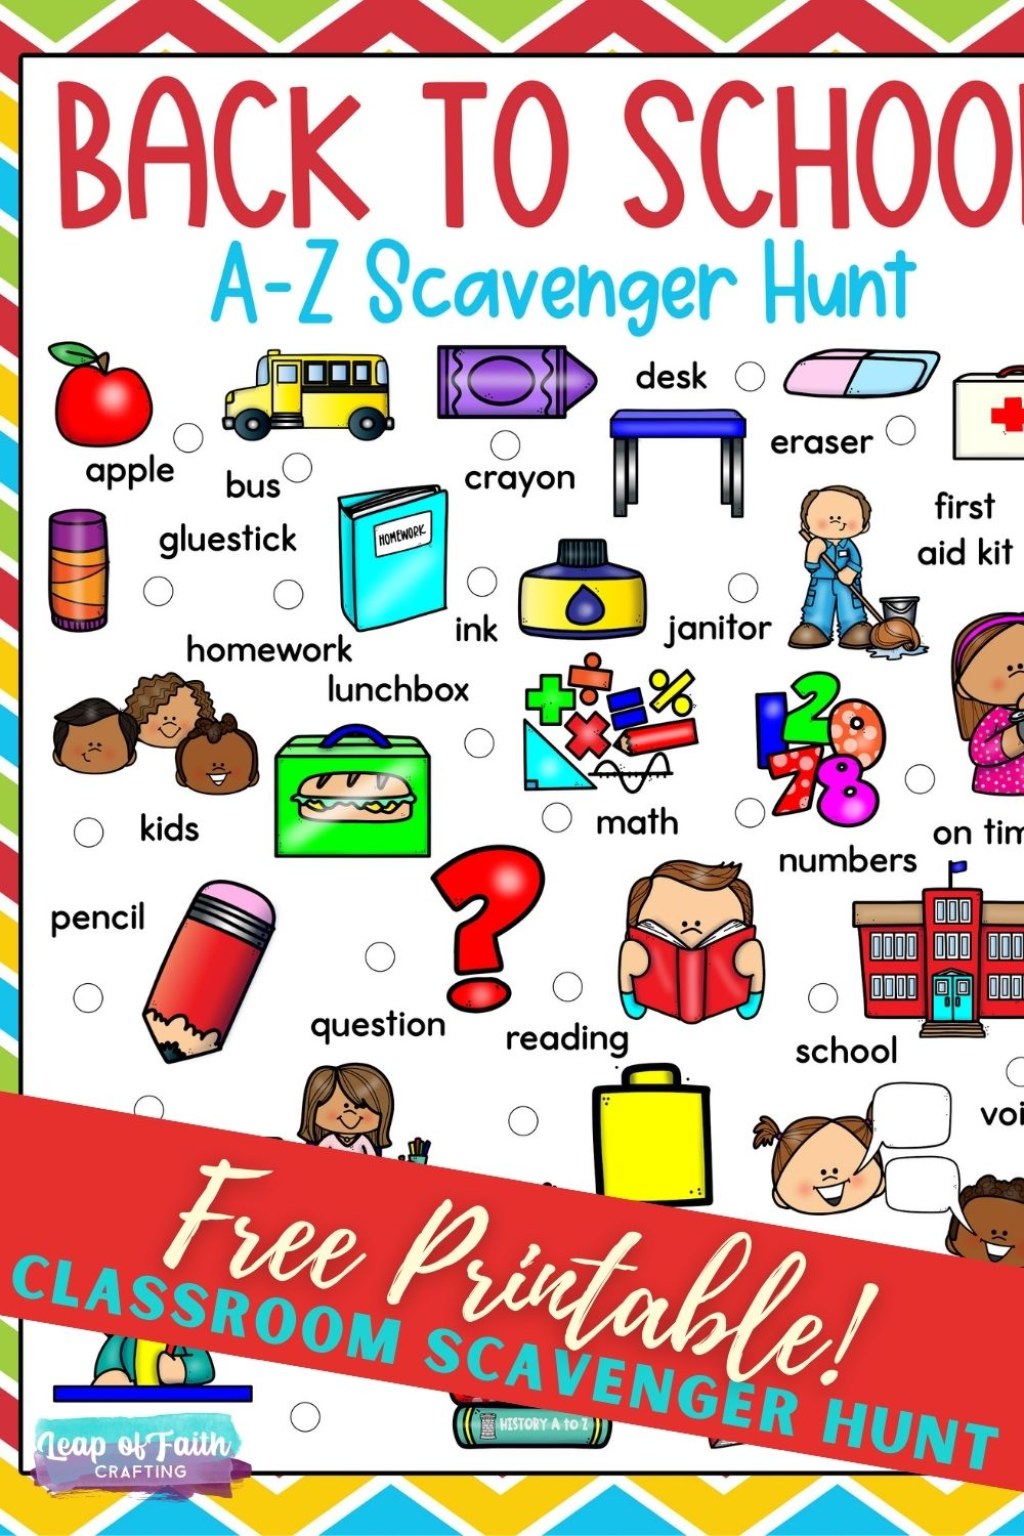 Picture of: FREE Classroom Scavenger Hunt A to Z Printable! – Leap of Faith